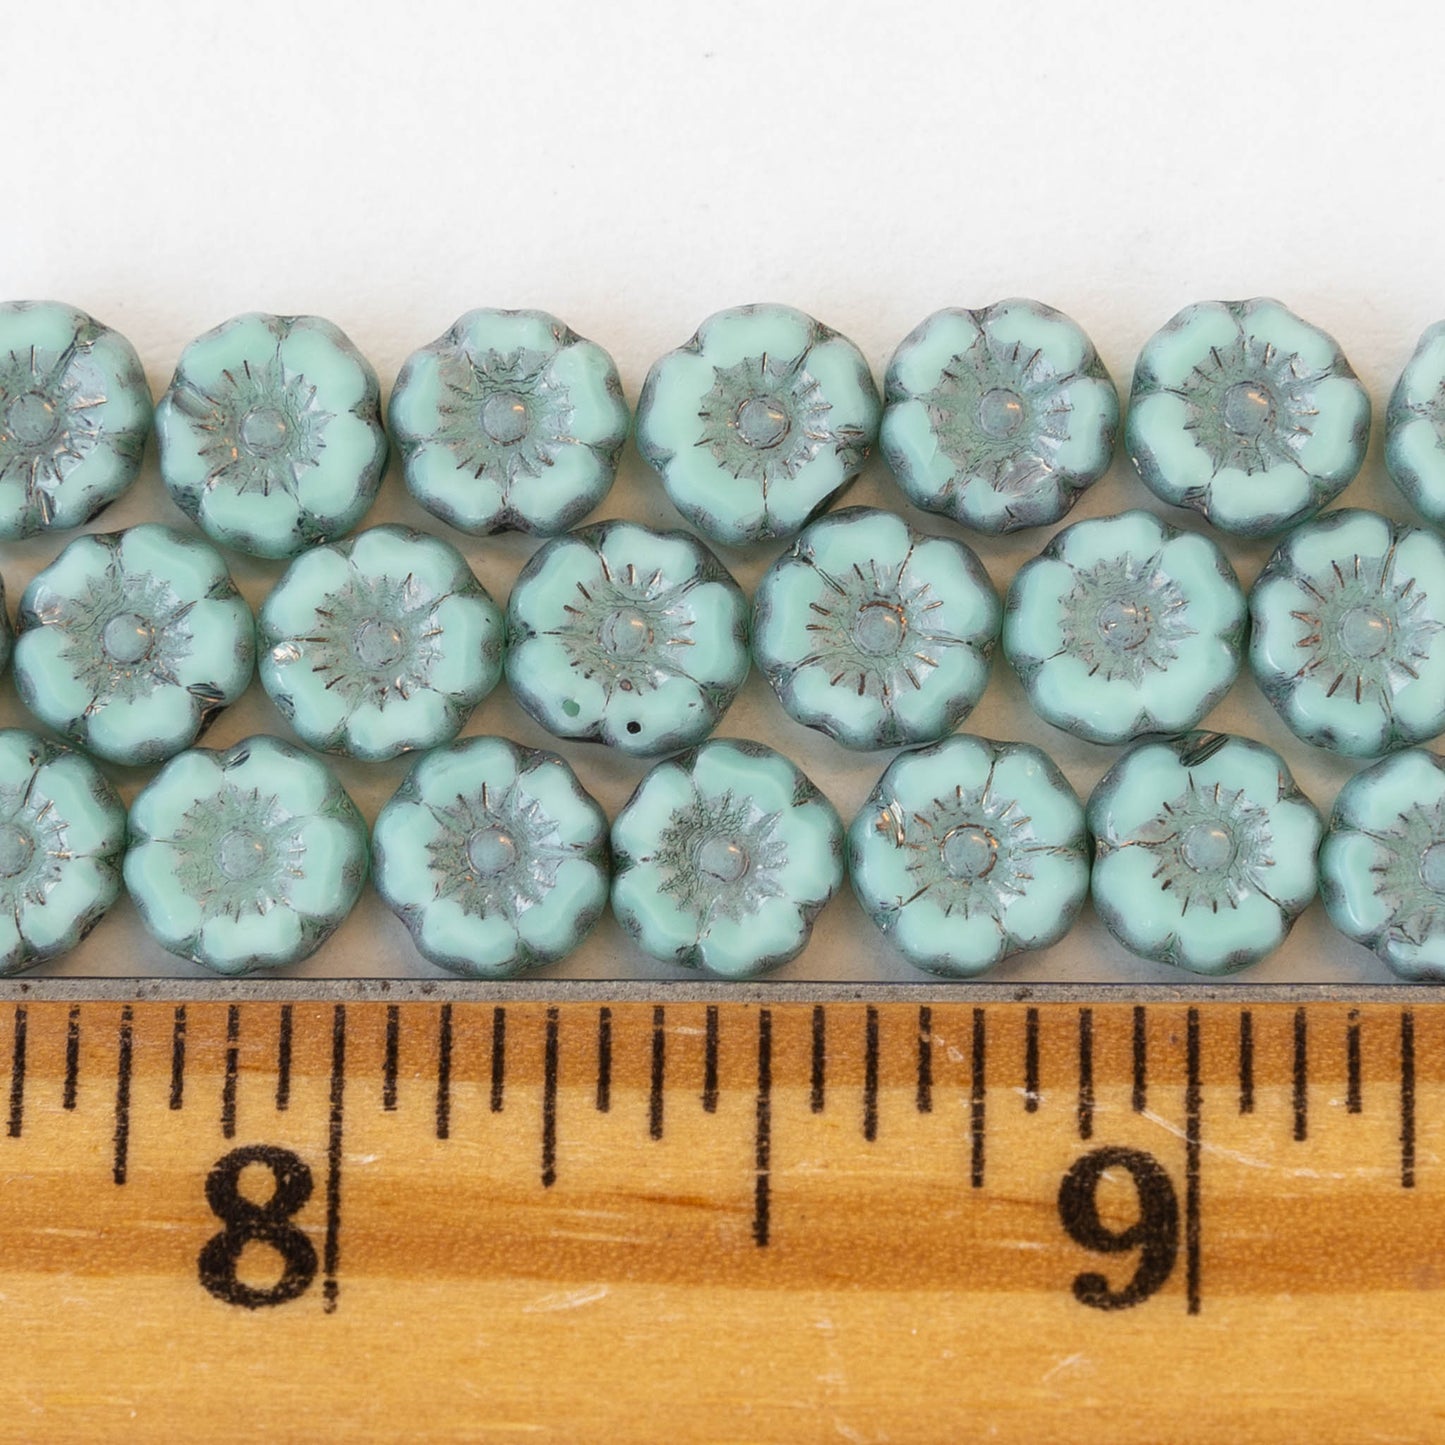 7mm Glass Flower Beads - Light Blue with Picasso Wash - 12 Beads